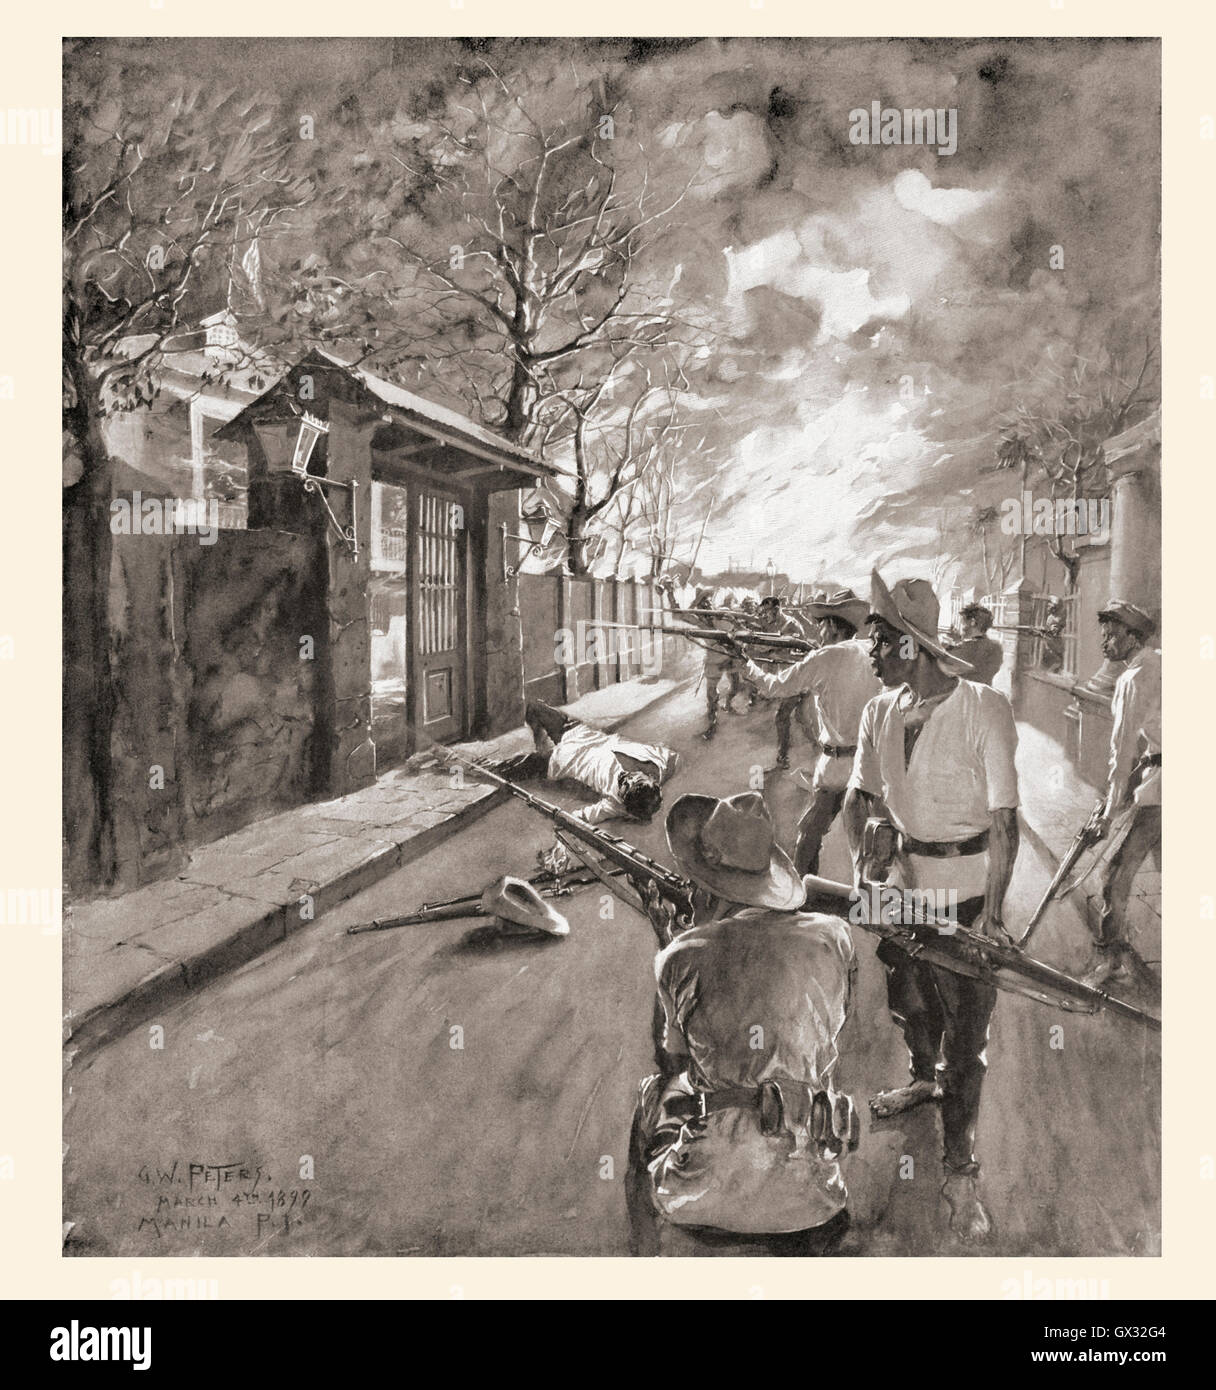 Manila during the Philippine-American War.  Filipino attack on the barracks of Co. C, 13th Minnesota Volunteers, during the Tondo Fire.  After the drawing by G.W. Peters. Stock Photo